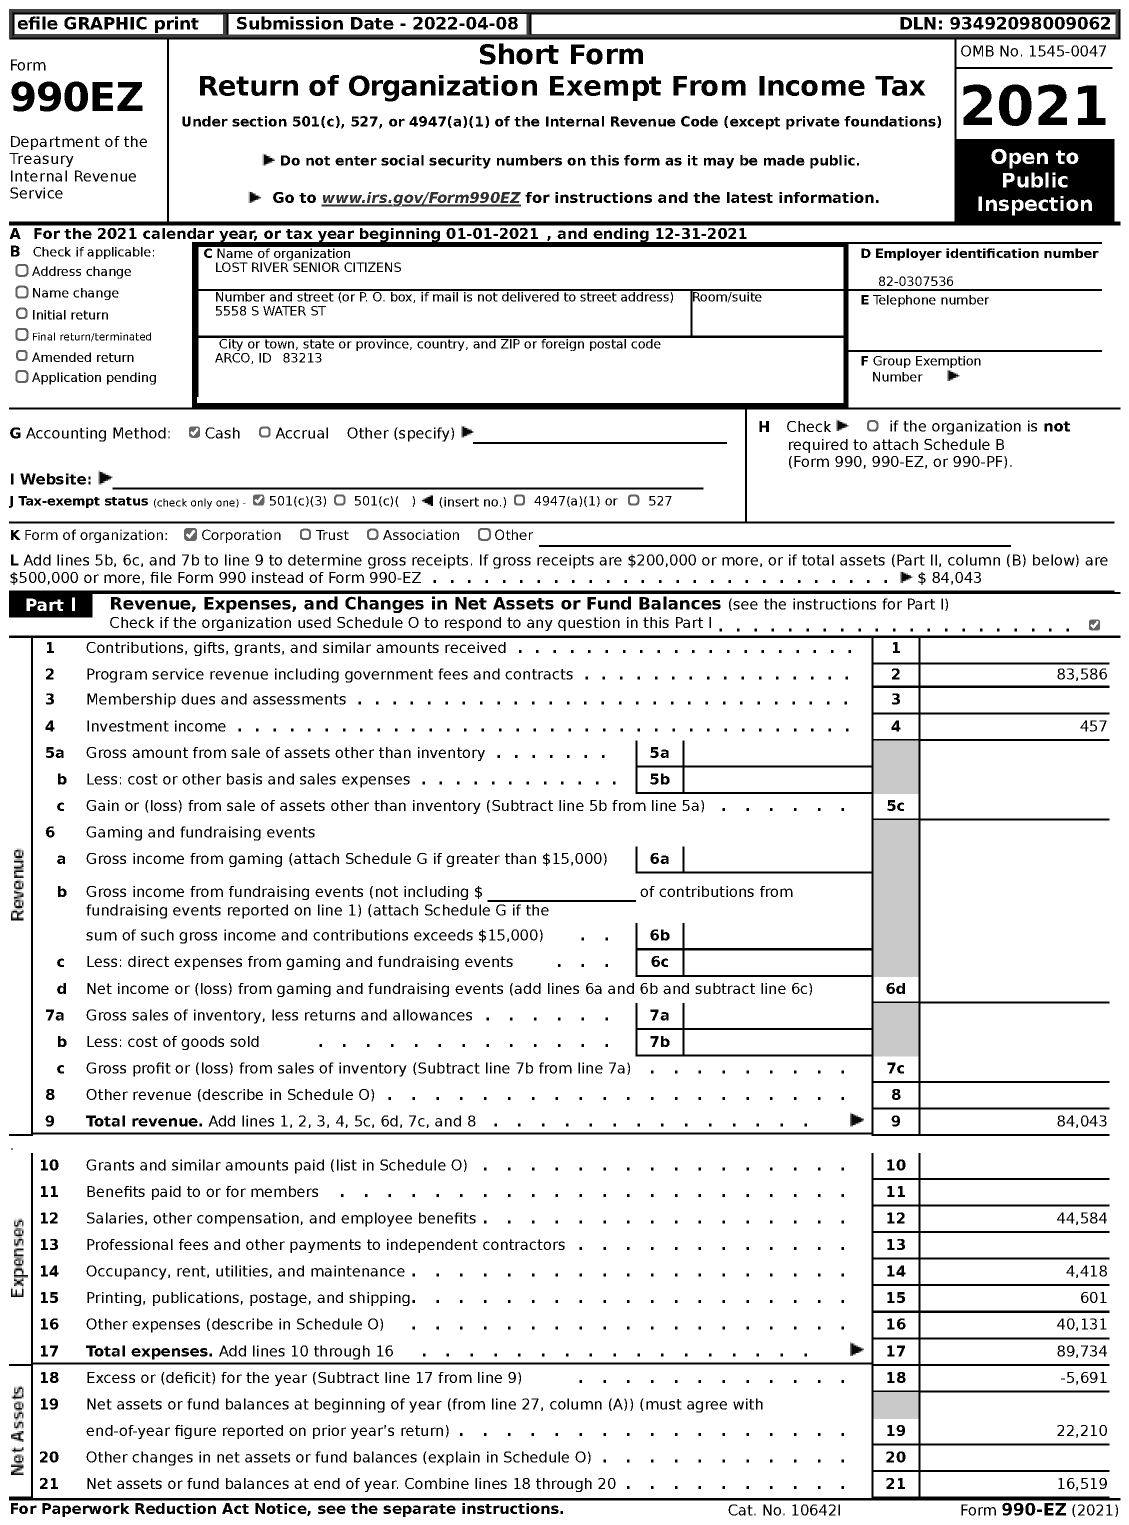 Image of first page of 2021 Form 990EZ for Lost River Senior Citizens